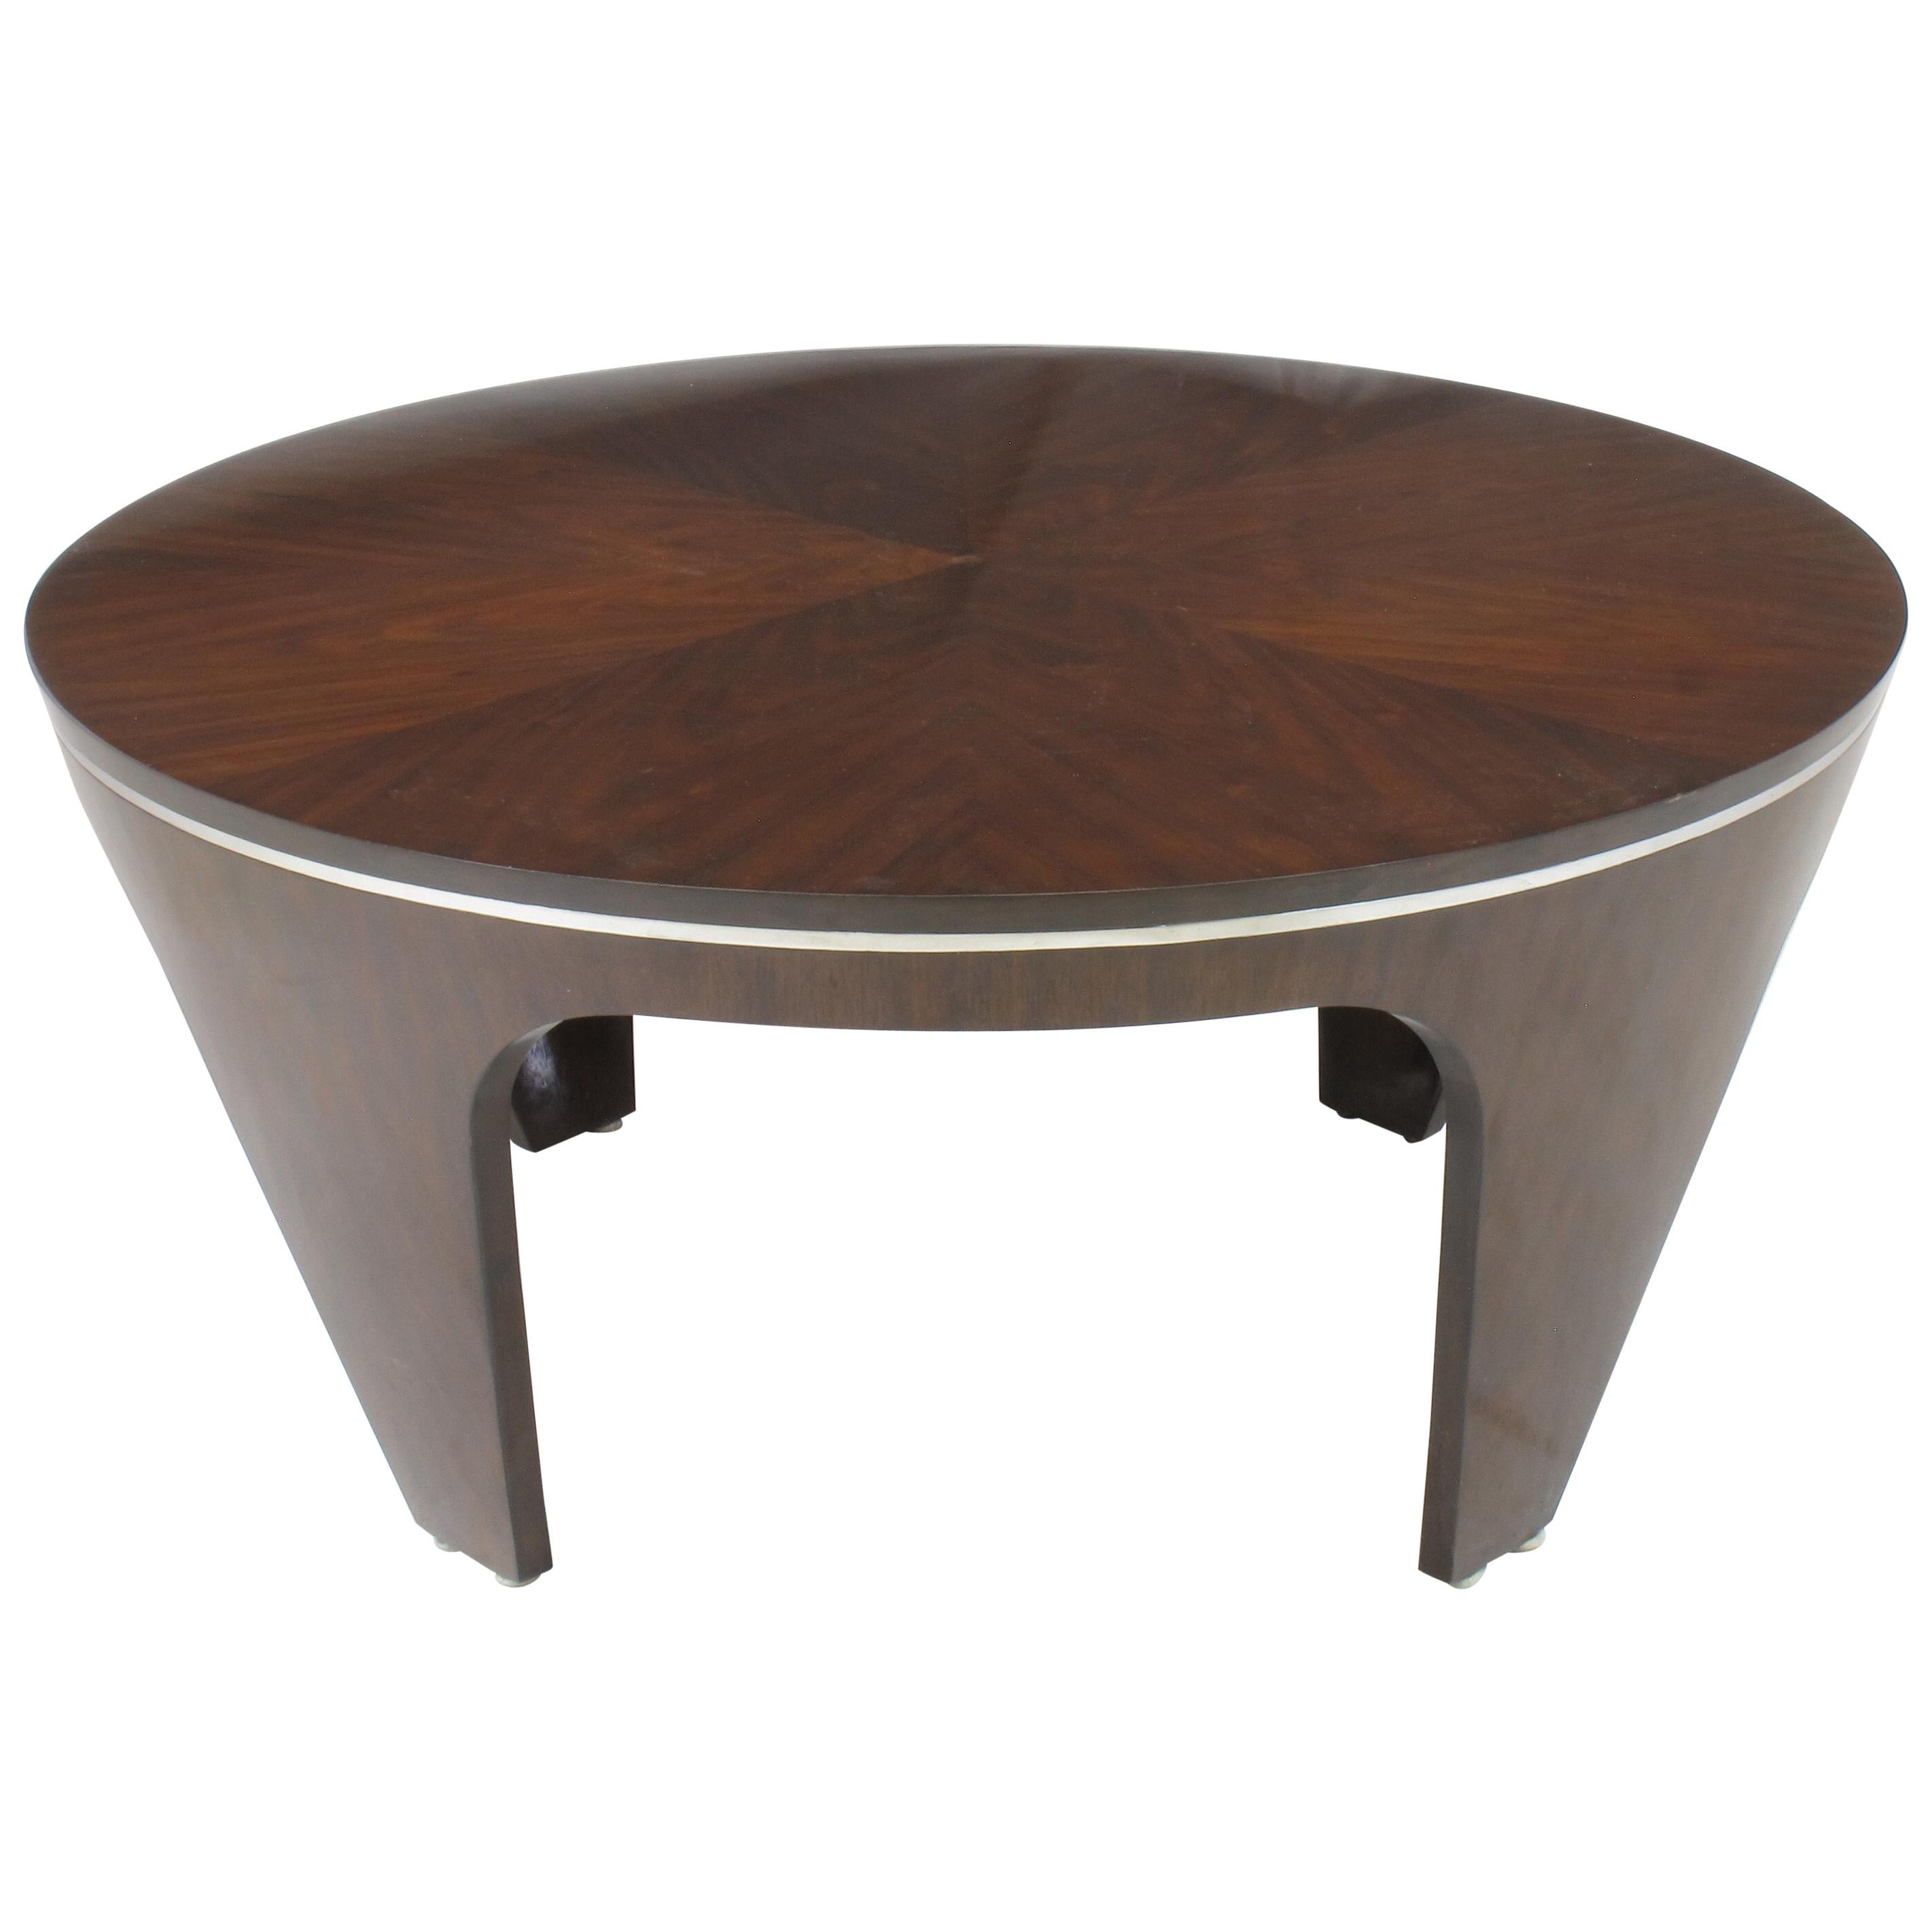 Italian Art Deco Revival Round Mahogany Coffee Table with Parquetry Top